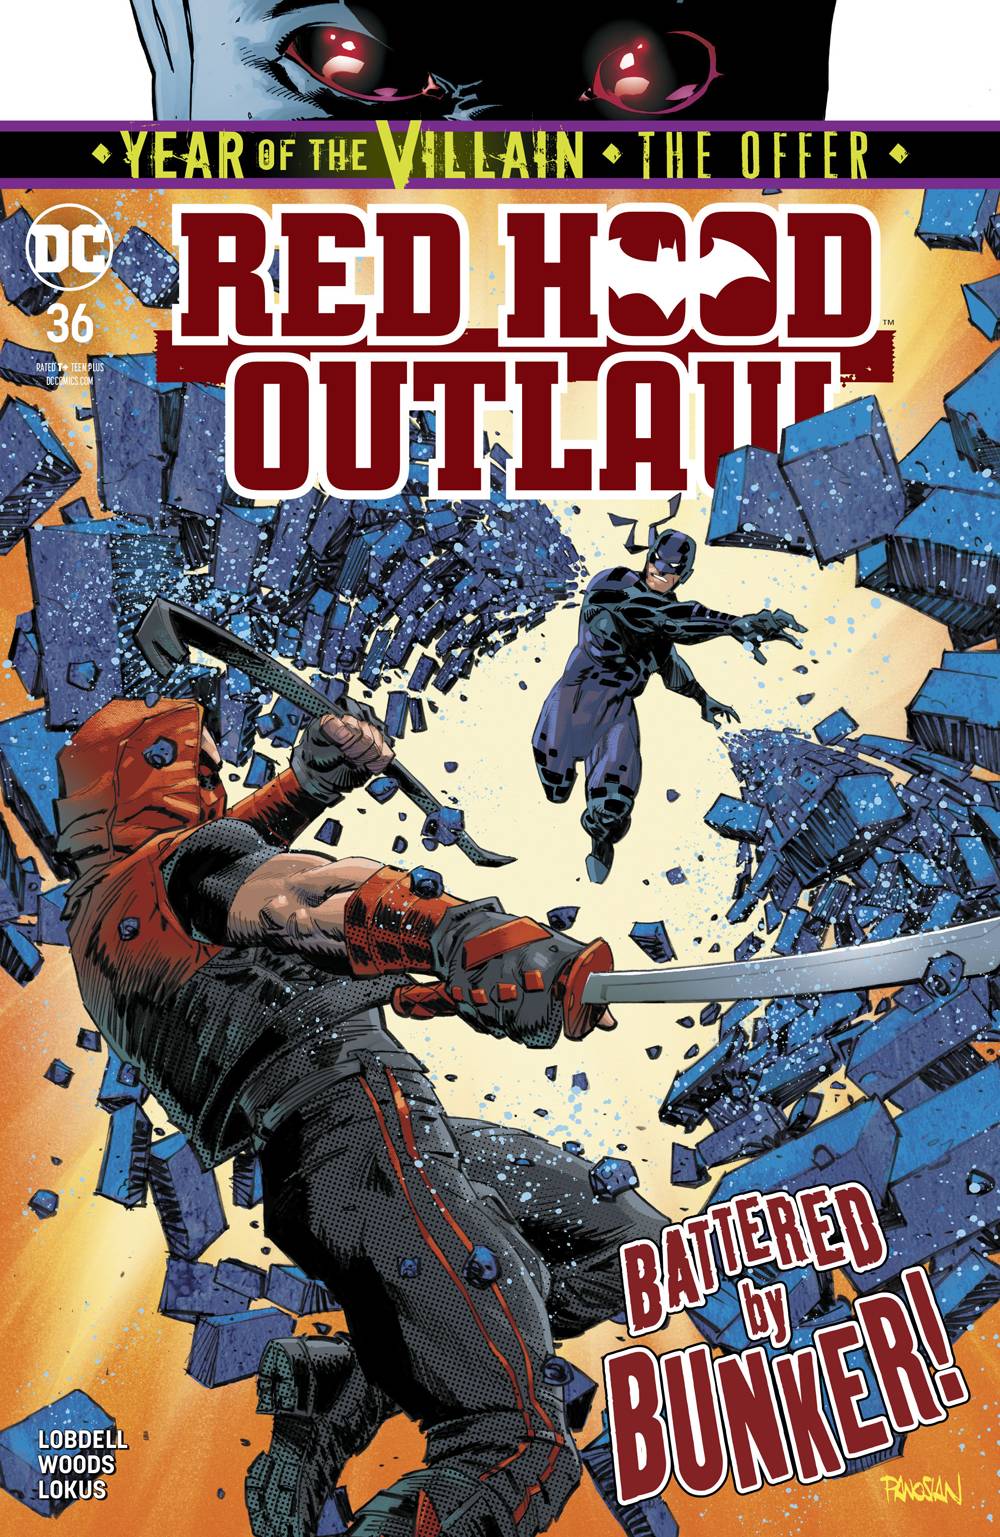 RED HOOD OUTLAW #36 A Cully Hamner Year Of The Villain THE OFFER (07/10/2019) DC